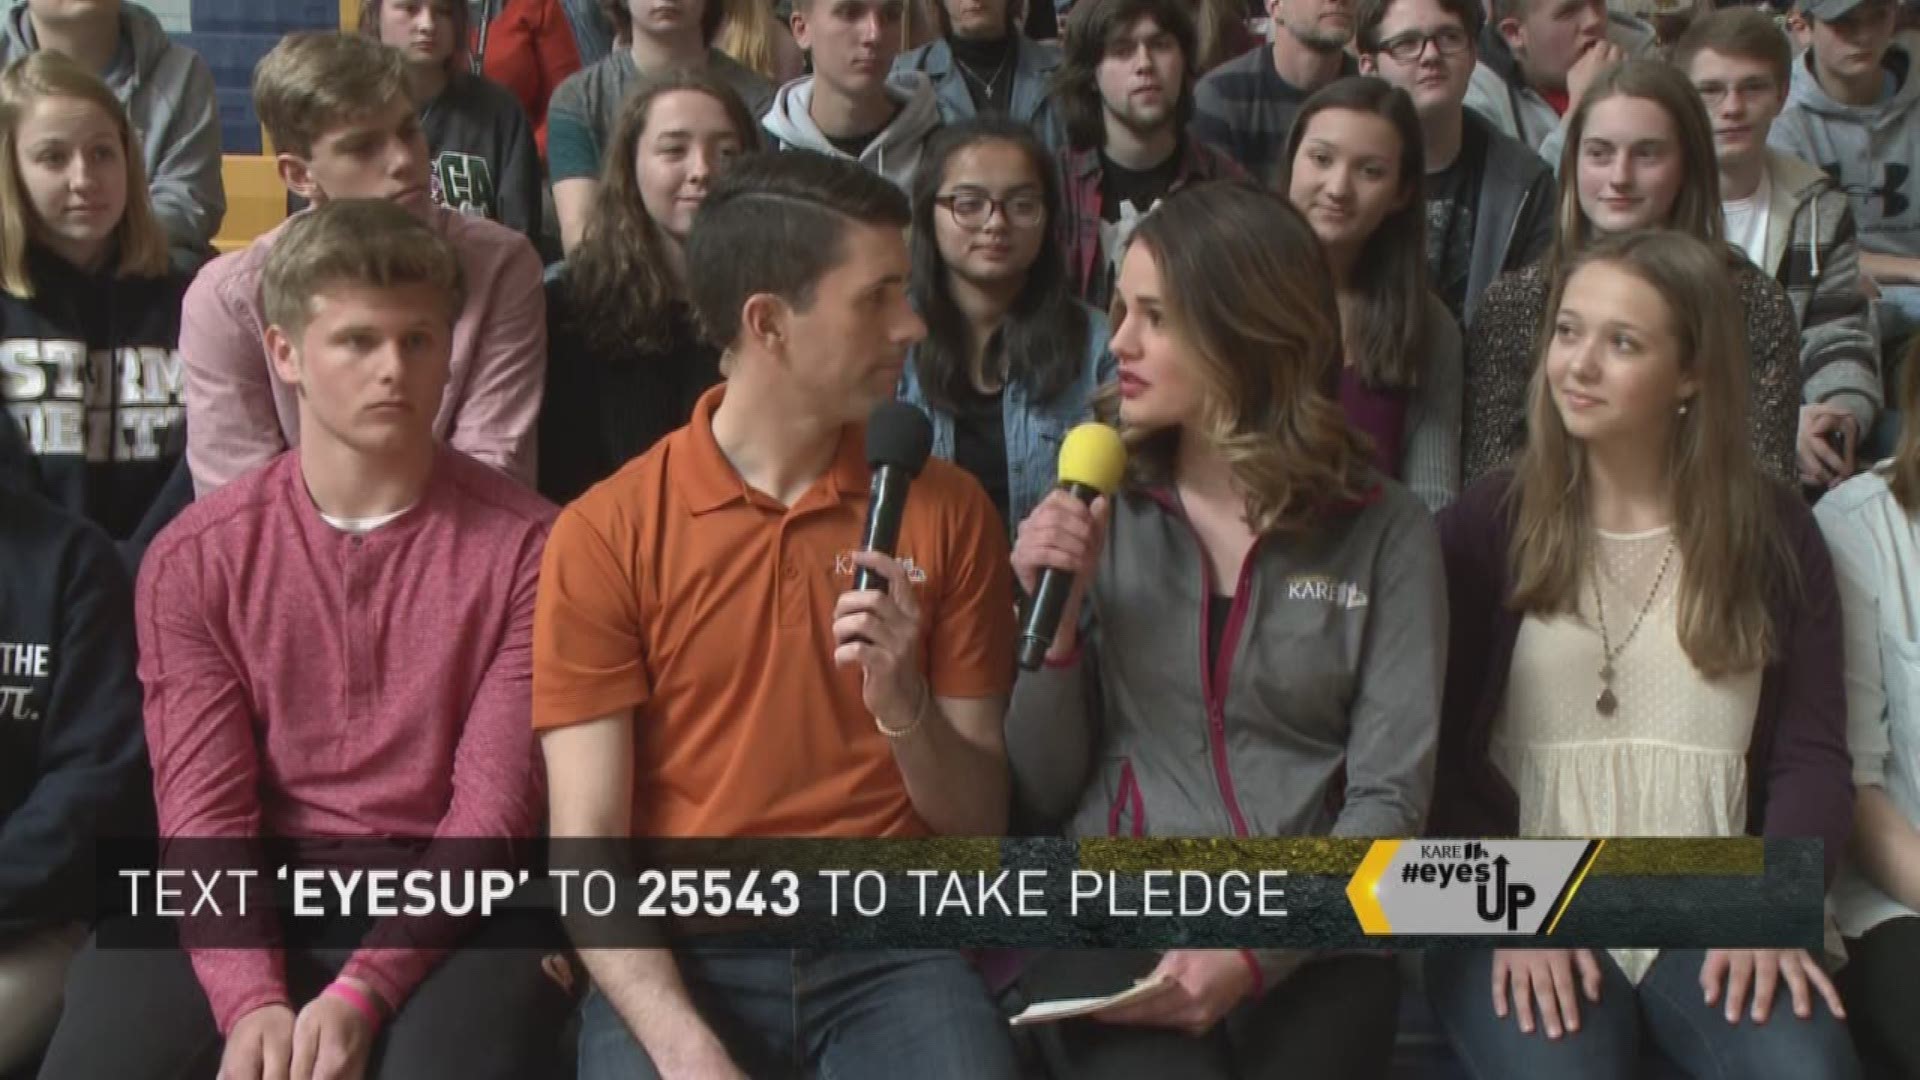 KARE 11 launched the #eyesUP campaign to end distracted driving live at Chanhassen High School. Hosts Alicia Lewis and Bryan Piatt were joined by Matt Logan who lost his daughter in an accident caused by texting and driving.